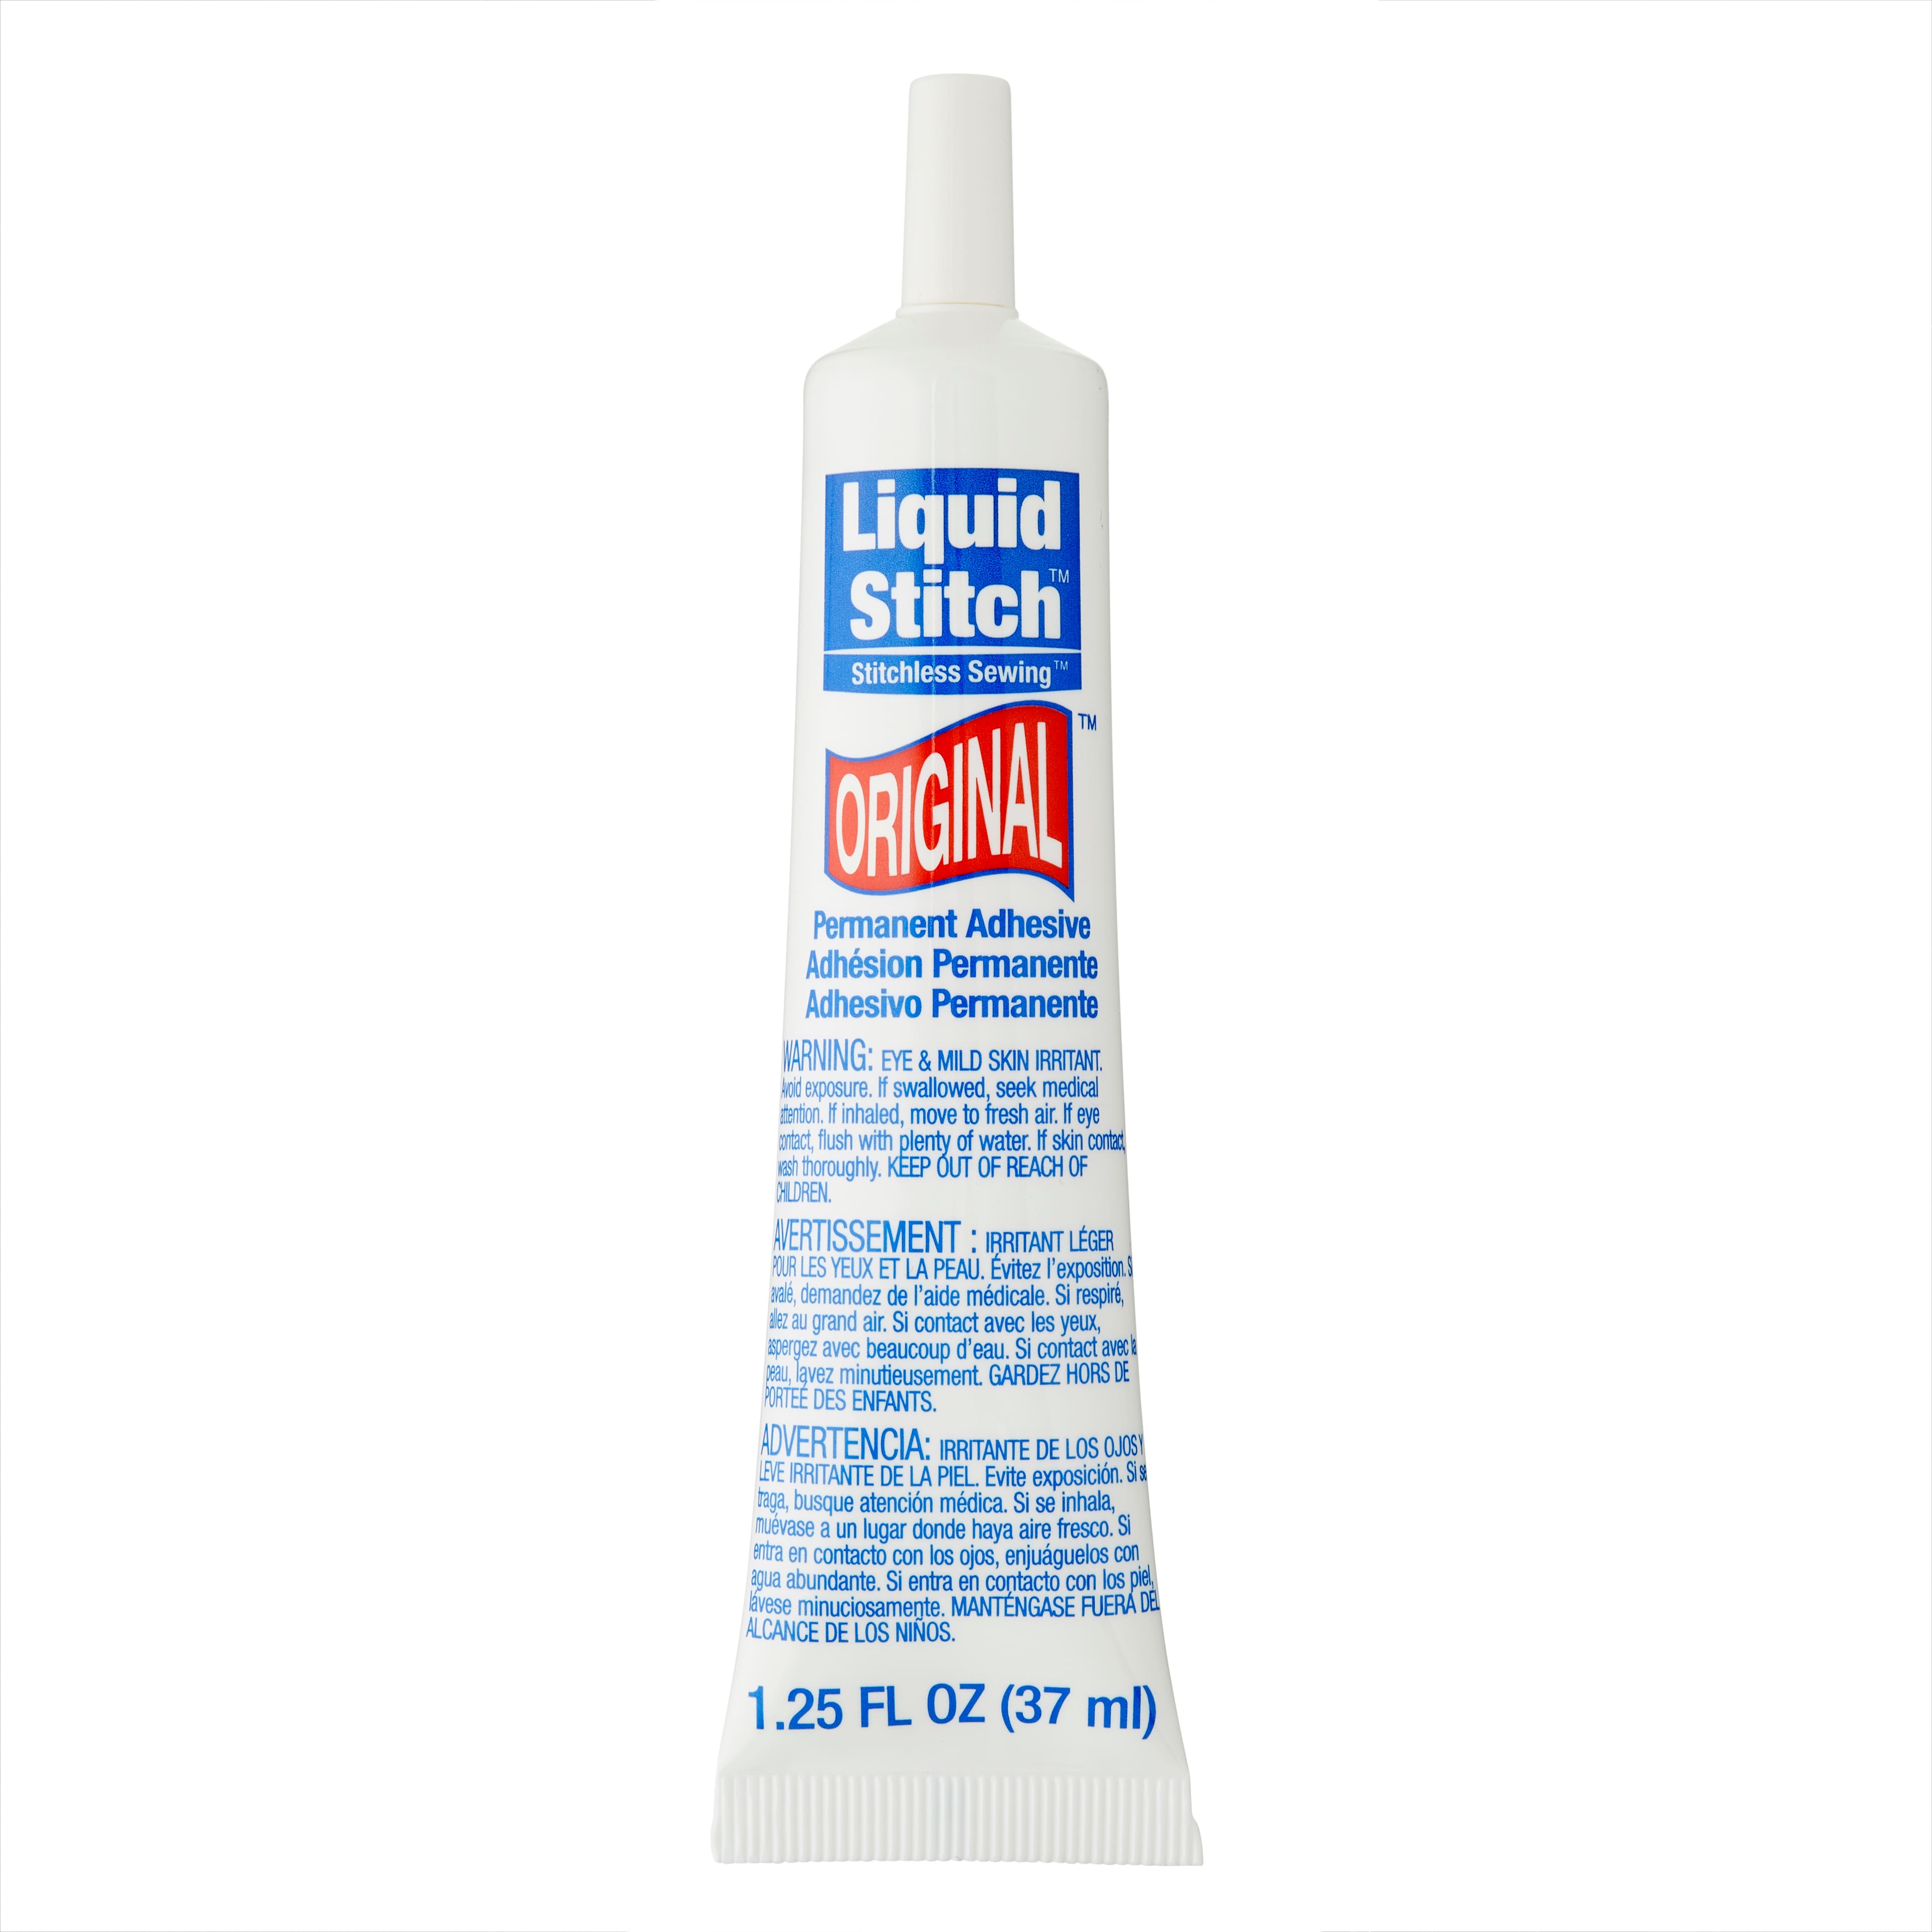 Dritz 395 Liquid Stitch 2 Fl Oz for Hems, Appliqués, Patches, Zippers and  More Permanent Adhesive Machine Washable and Dryable -  Finland